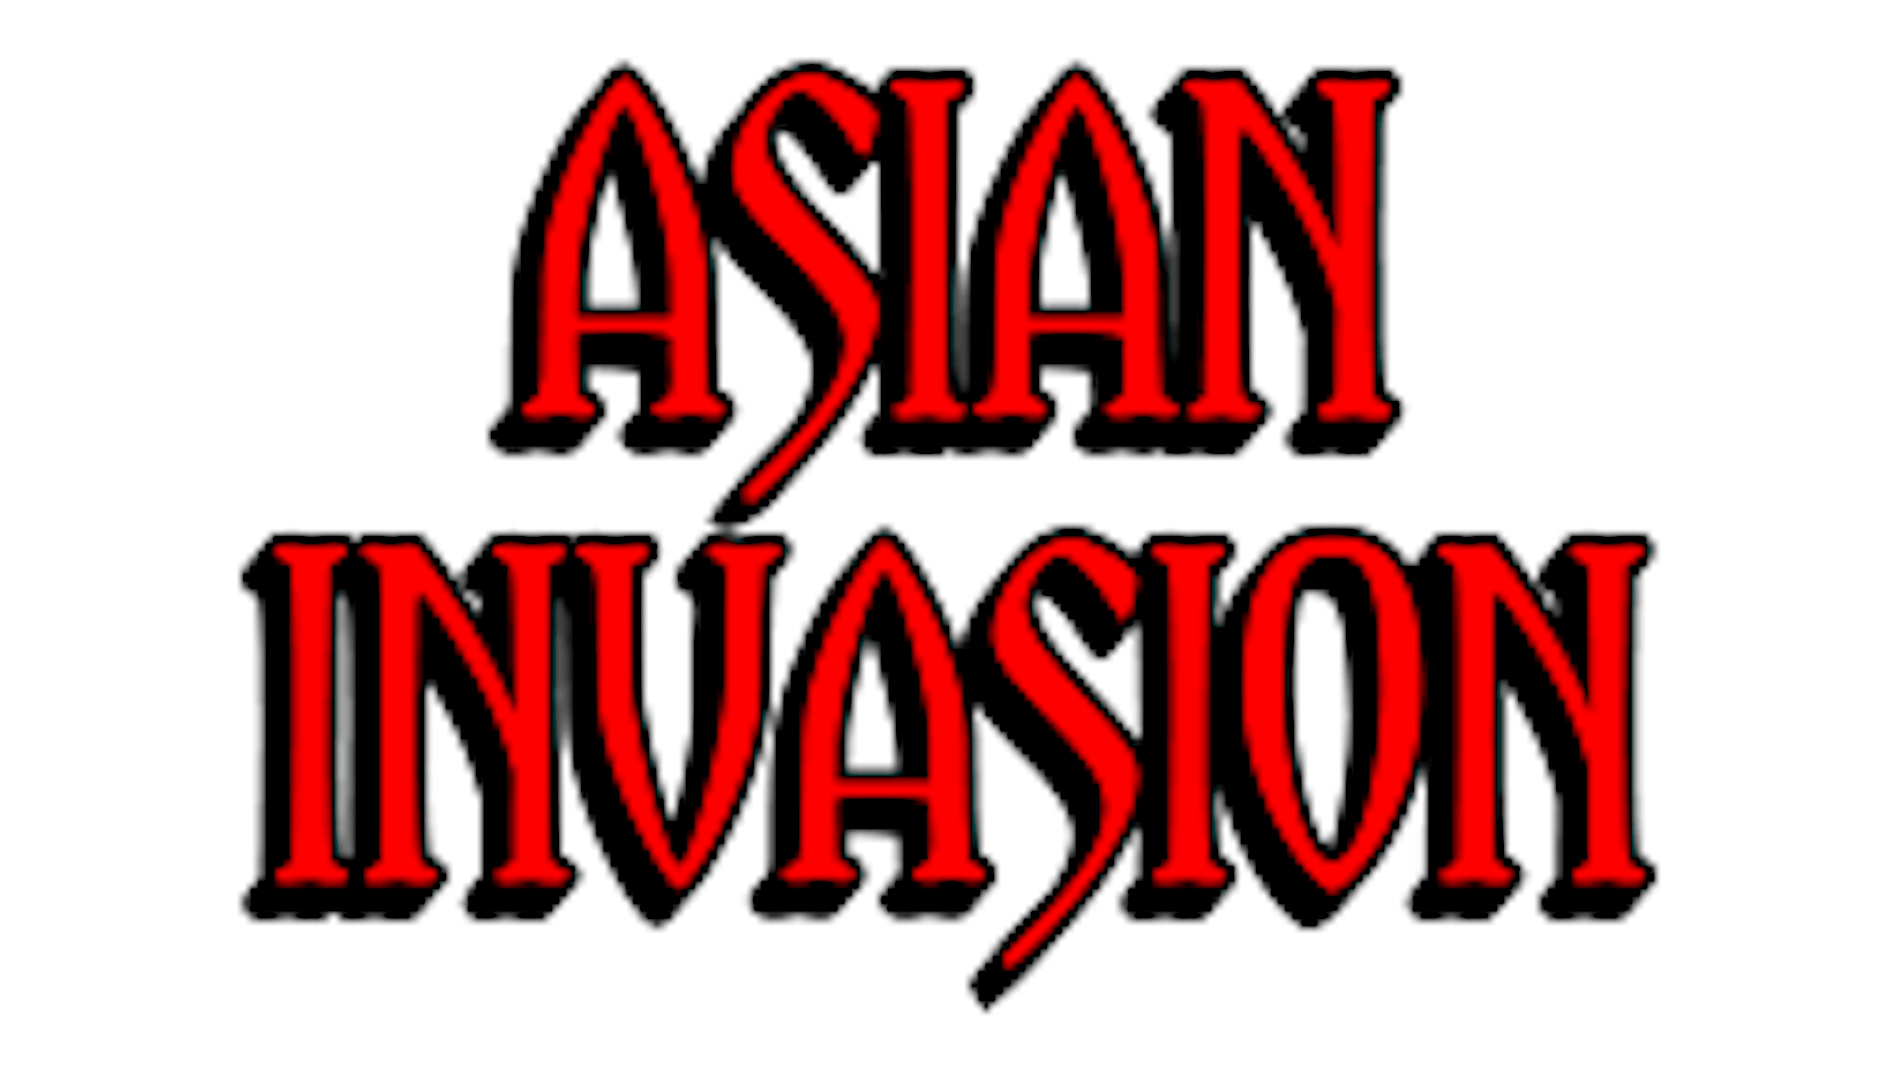 The Asian Invasion